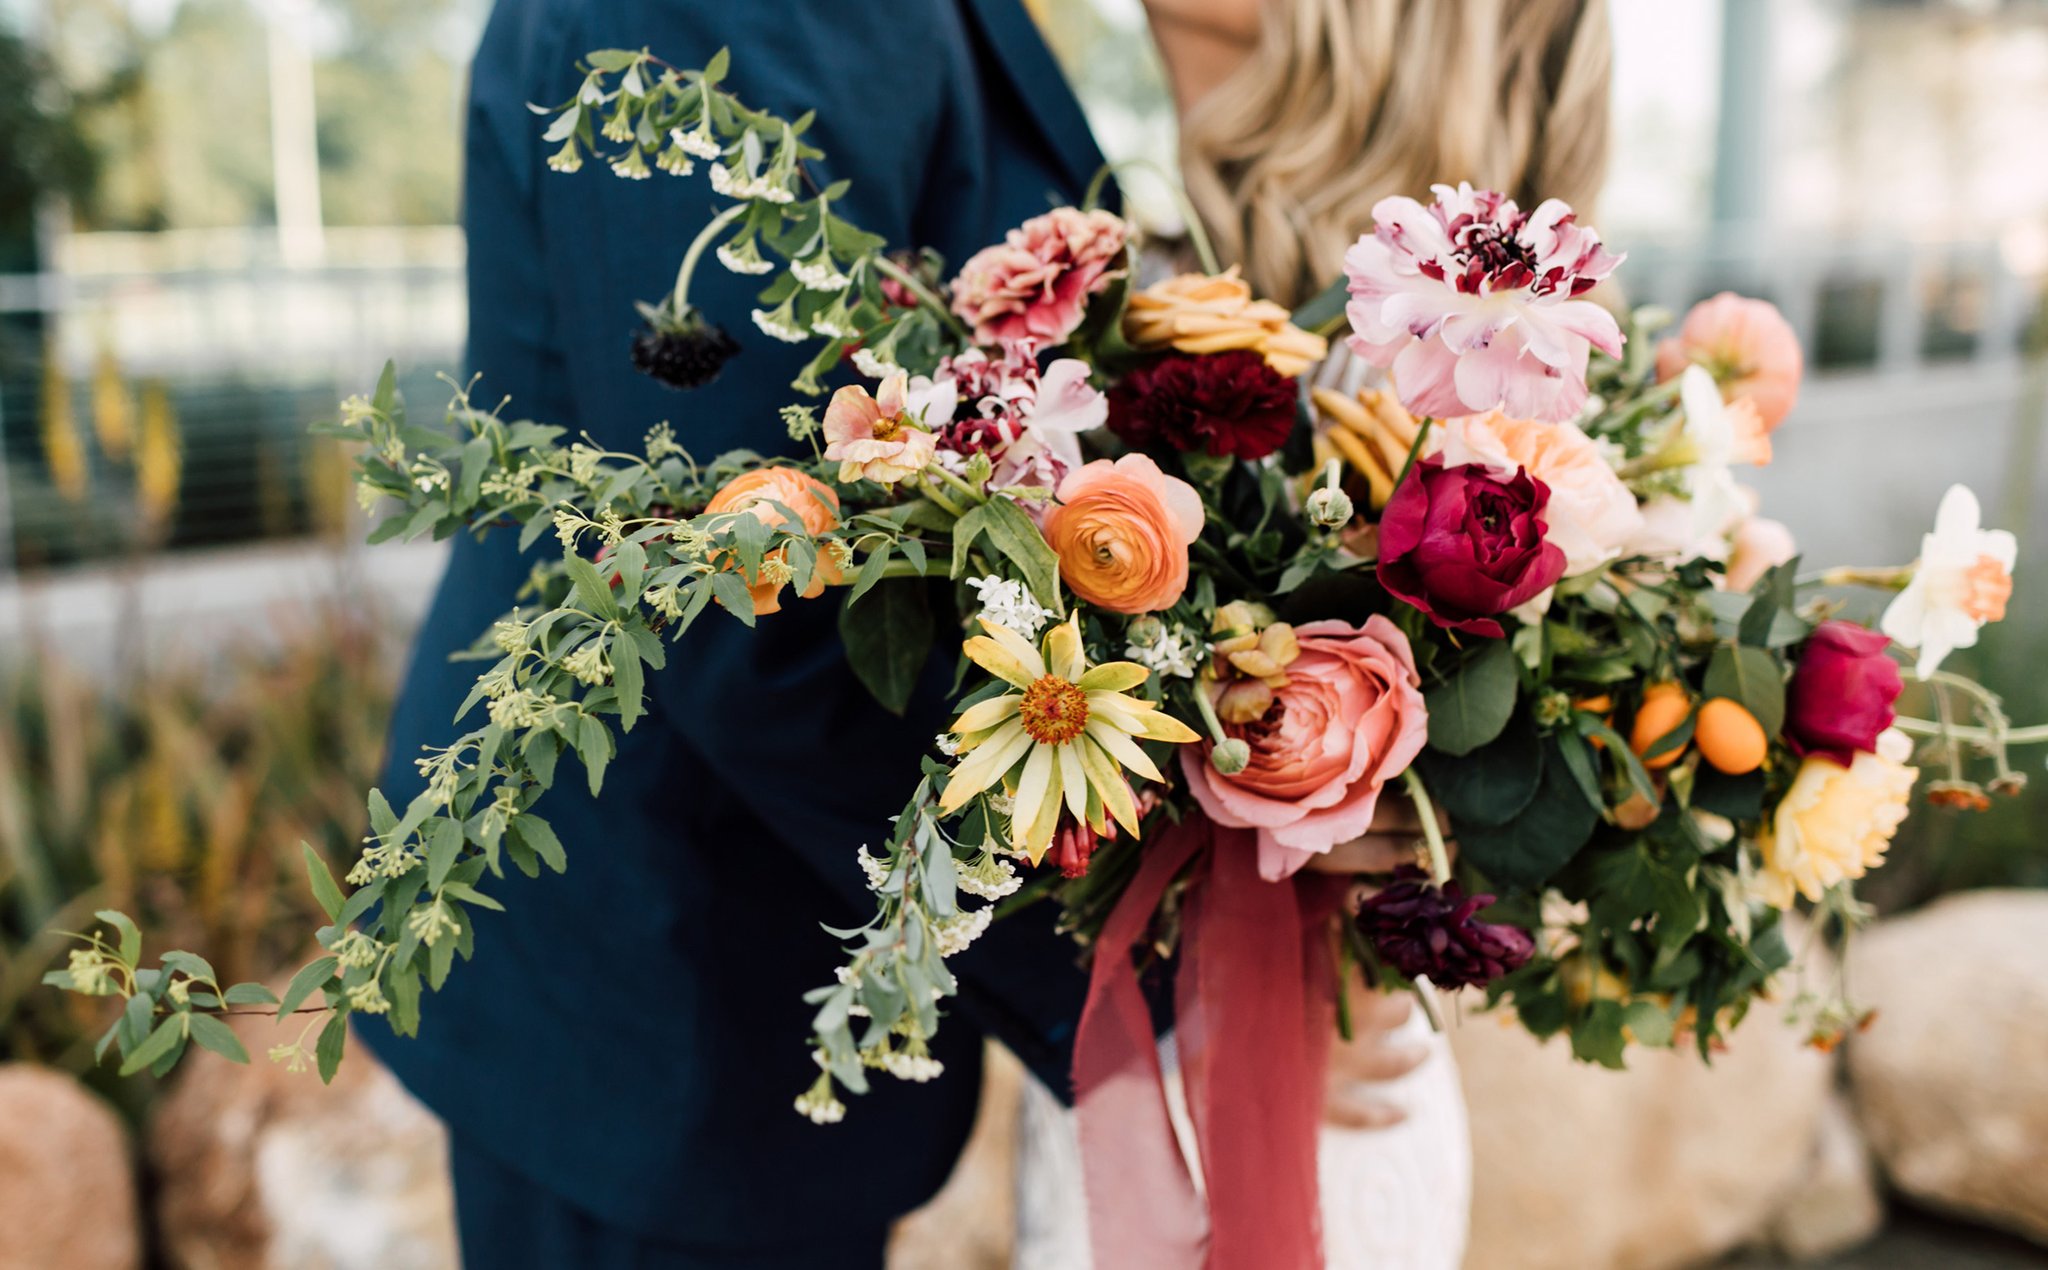 23 Wedding Bouquets That Will Have You Swooning